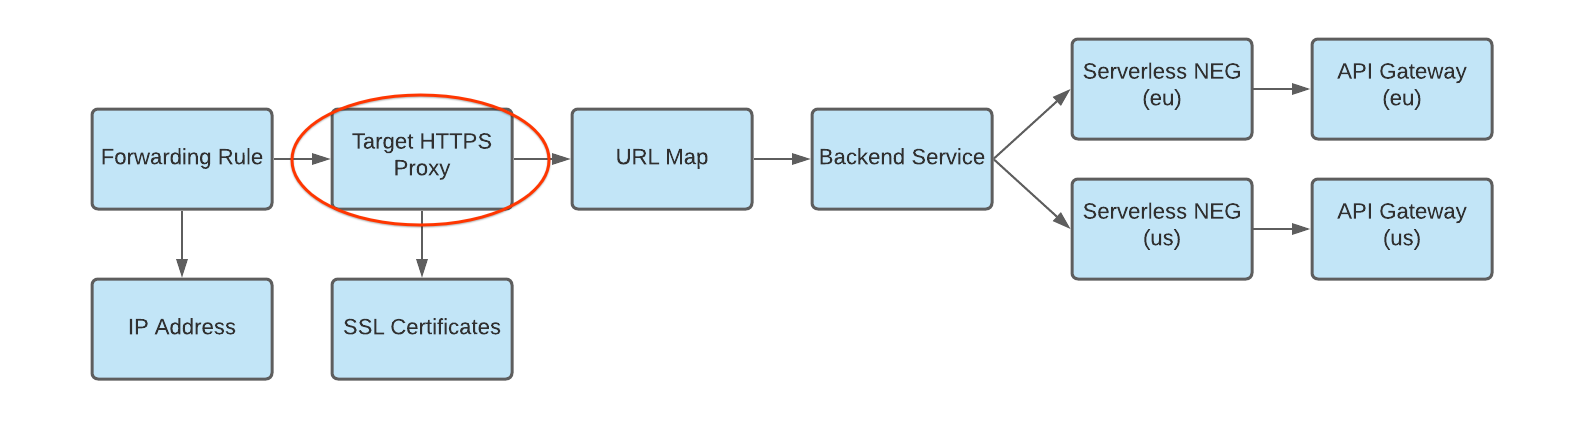 diagram of http proxy to url map